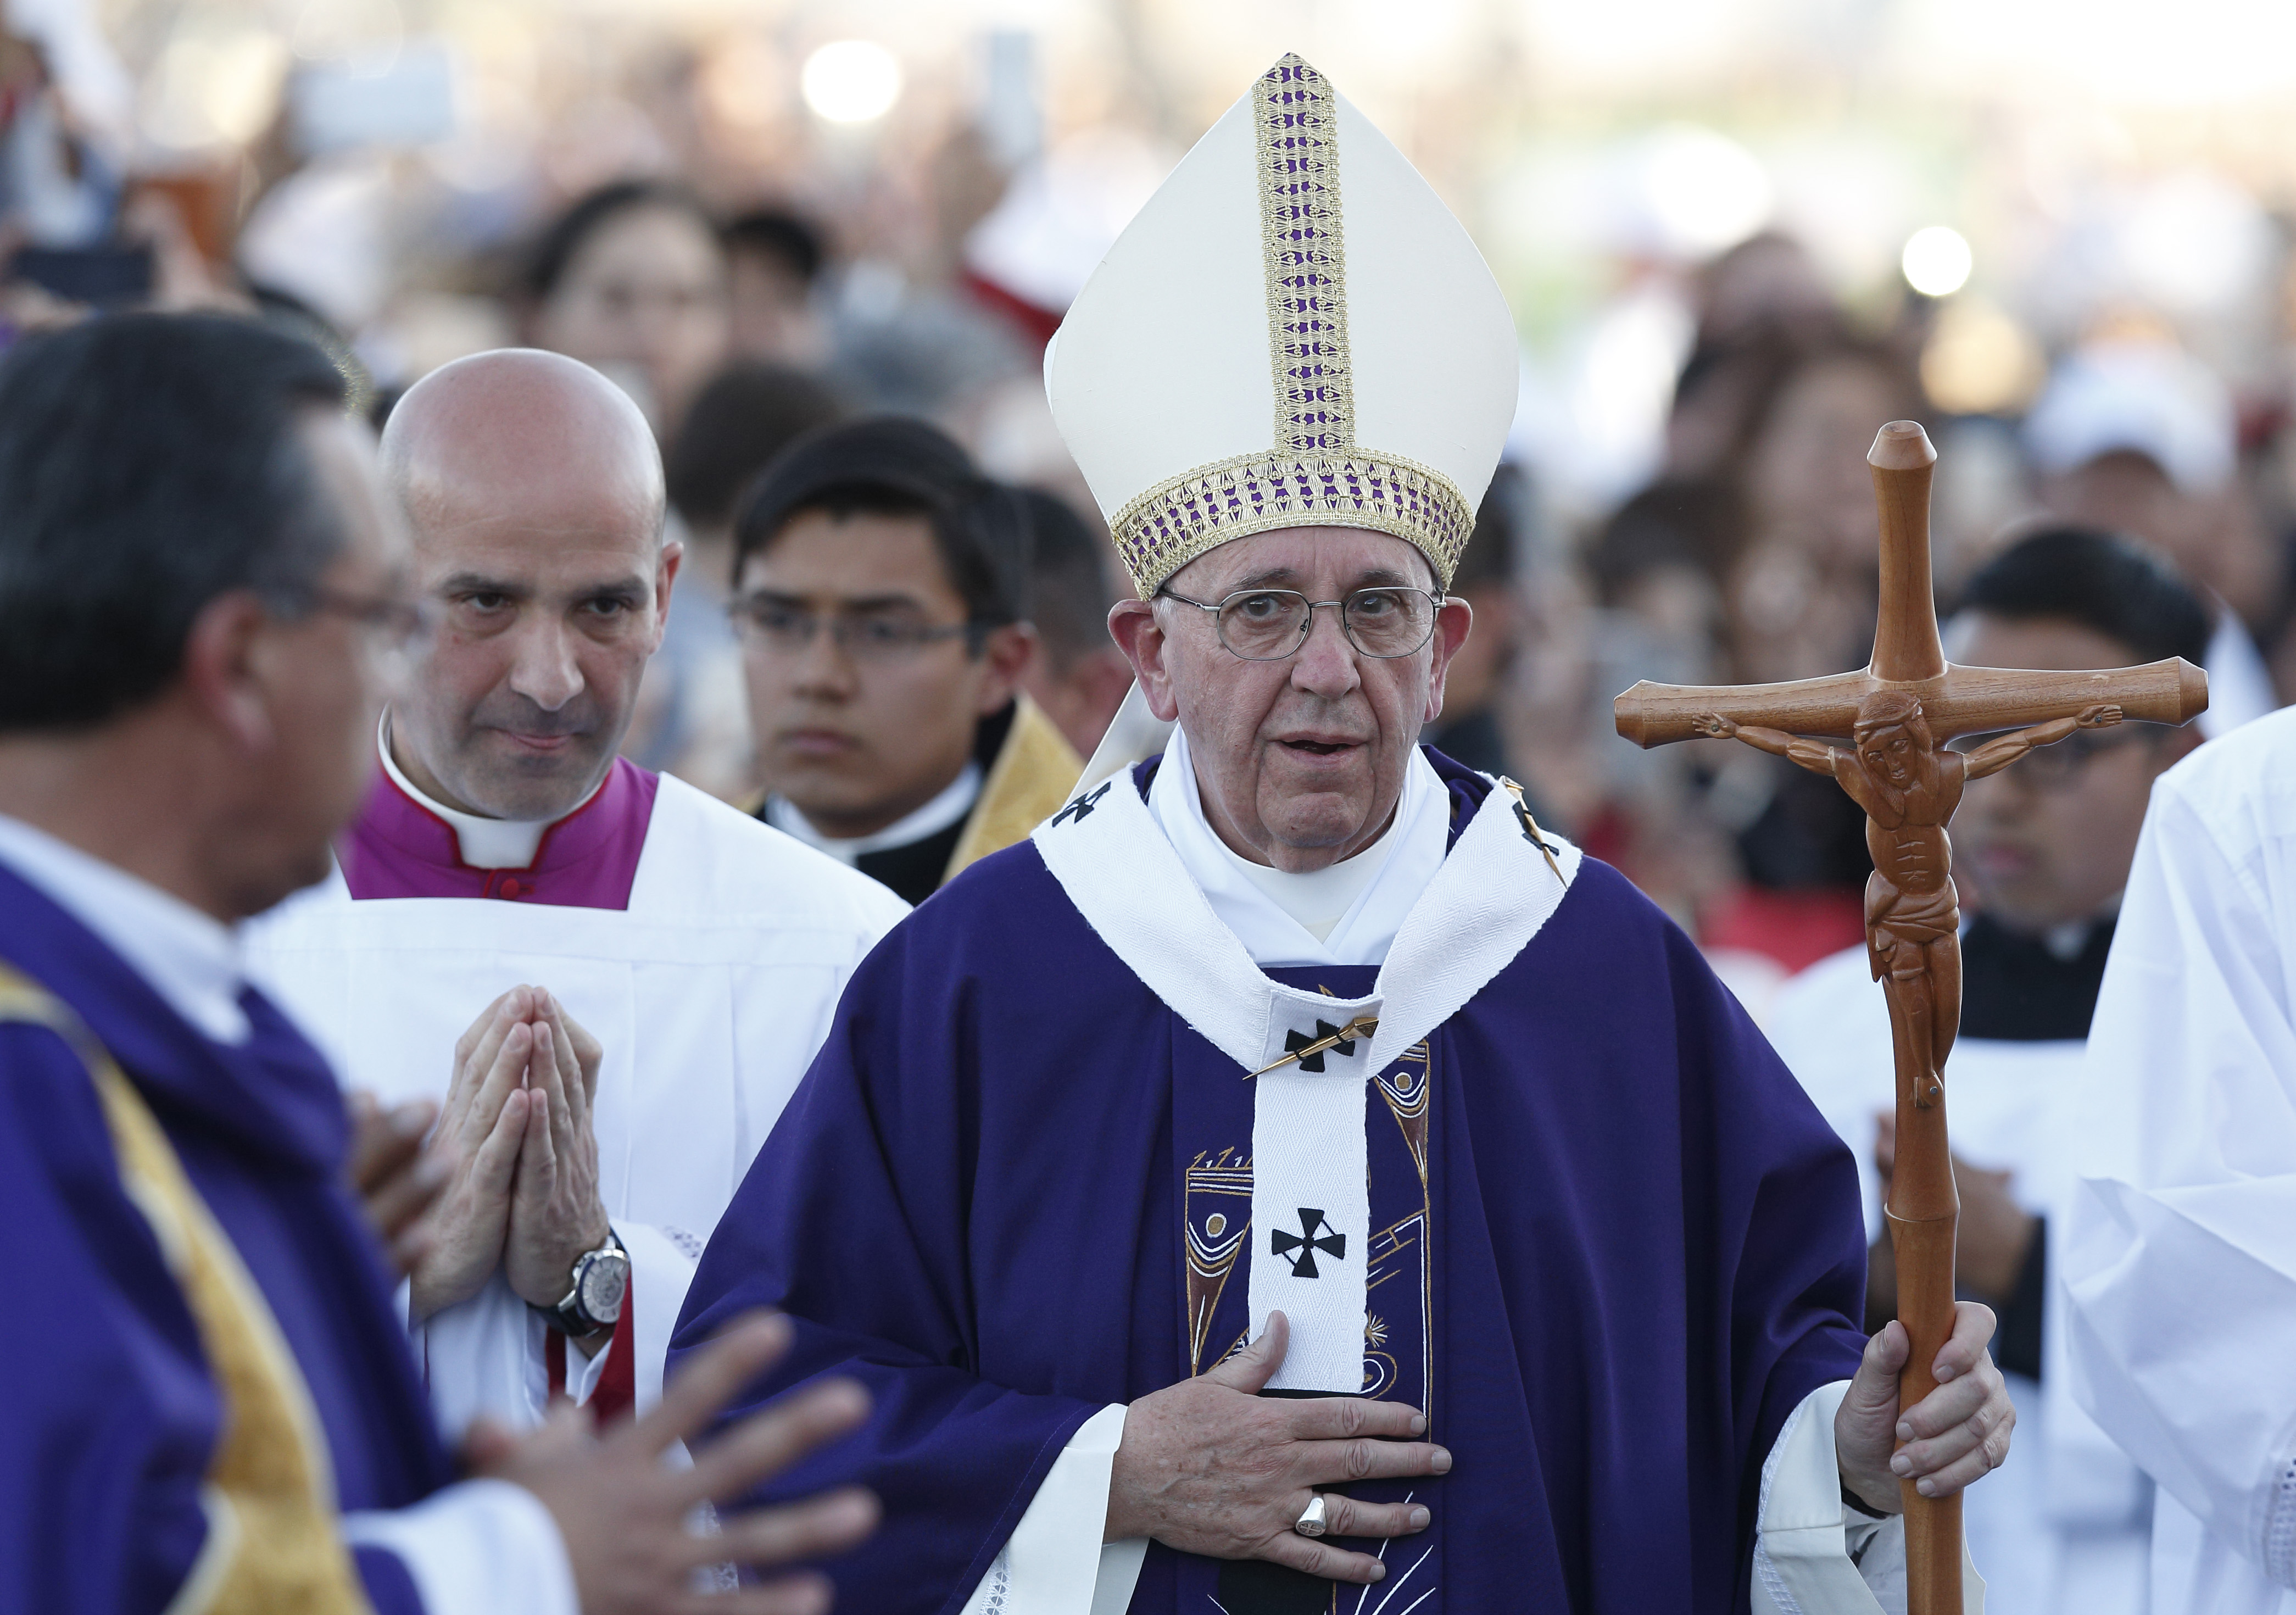 Pope Francis arrives in procession to celebrate Mass at the fairgrounds in Ciudad Juarez, Mexico, Feb. 17. (CNS photo/Paul Haring) See POPE-JUAREZ-MASS Feb. 17, 2016.